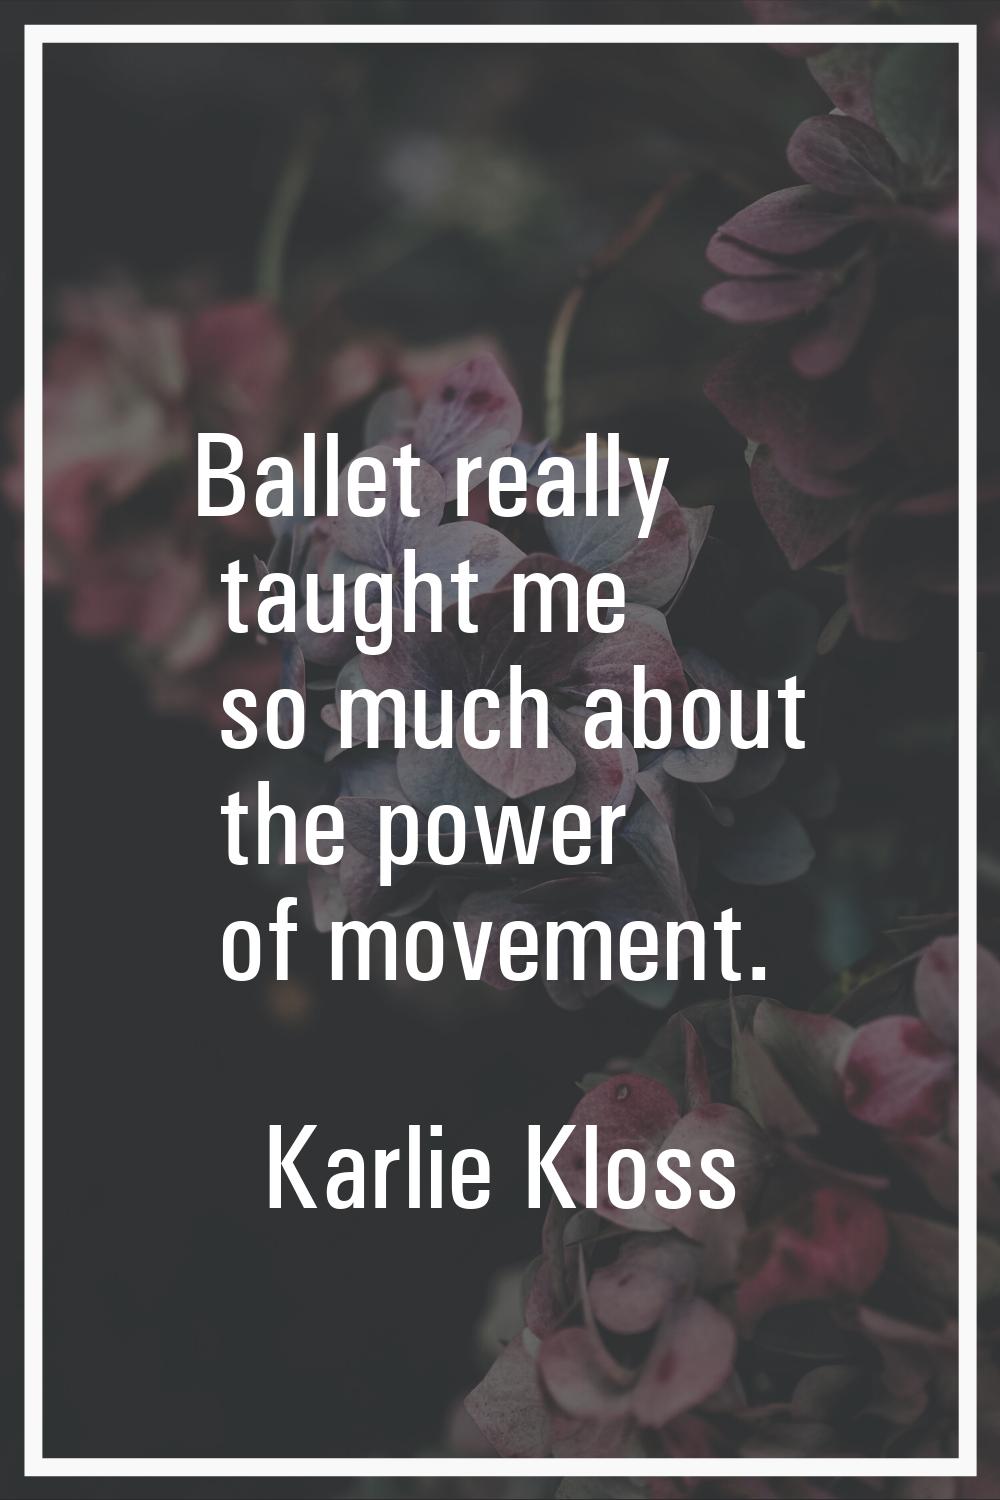 Ballet really taught me so much about the power of movement.